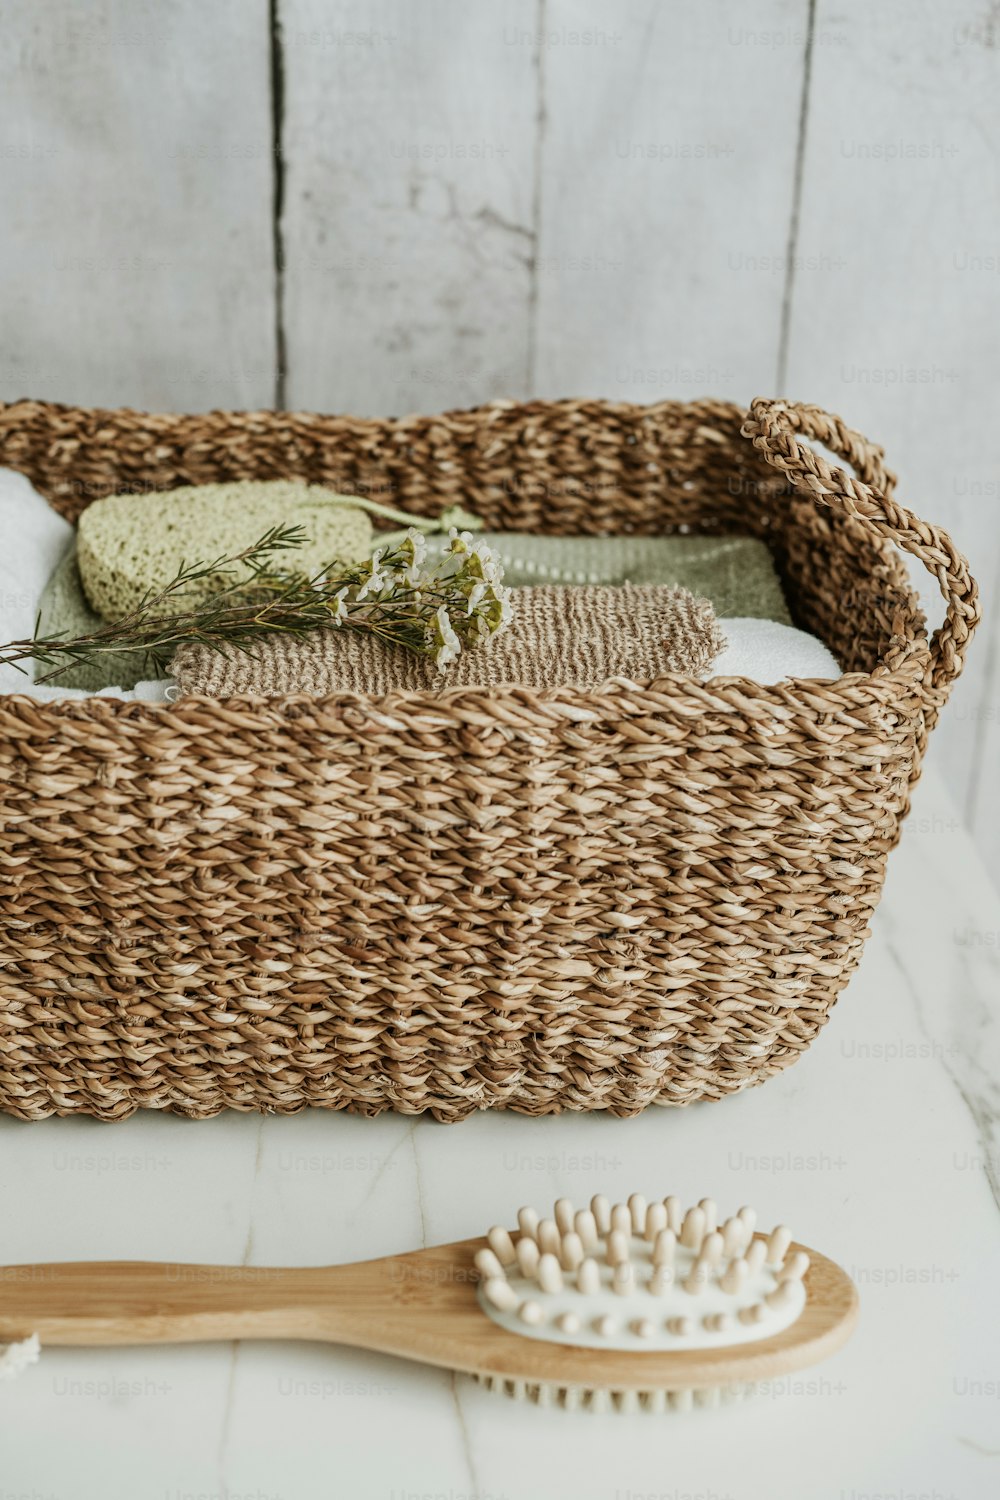 a wicker basket with a brush and soap on it